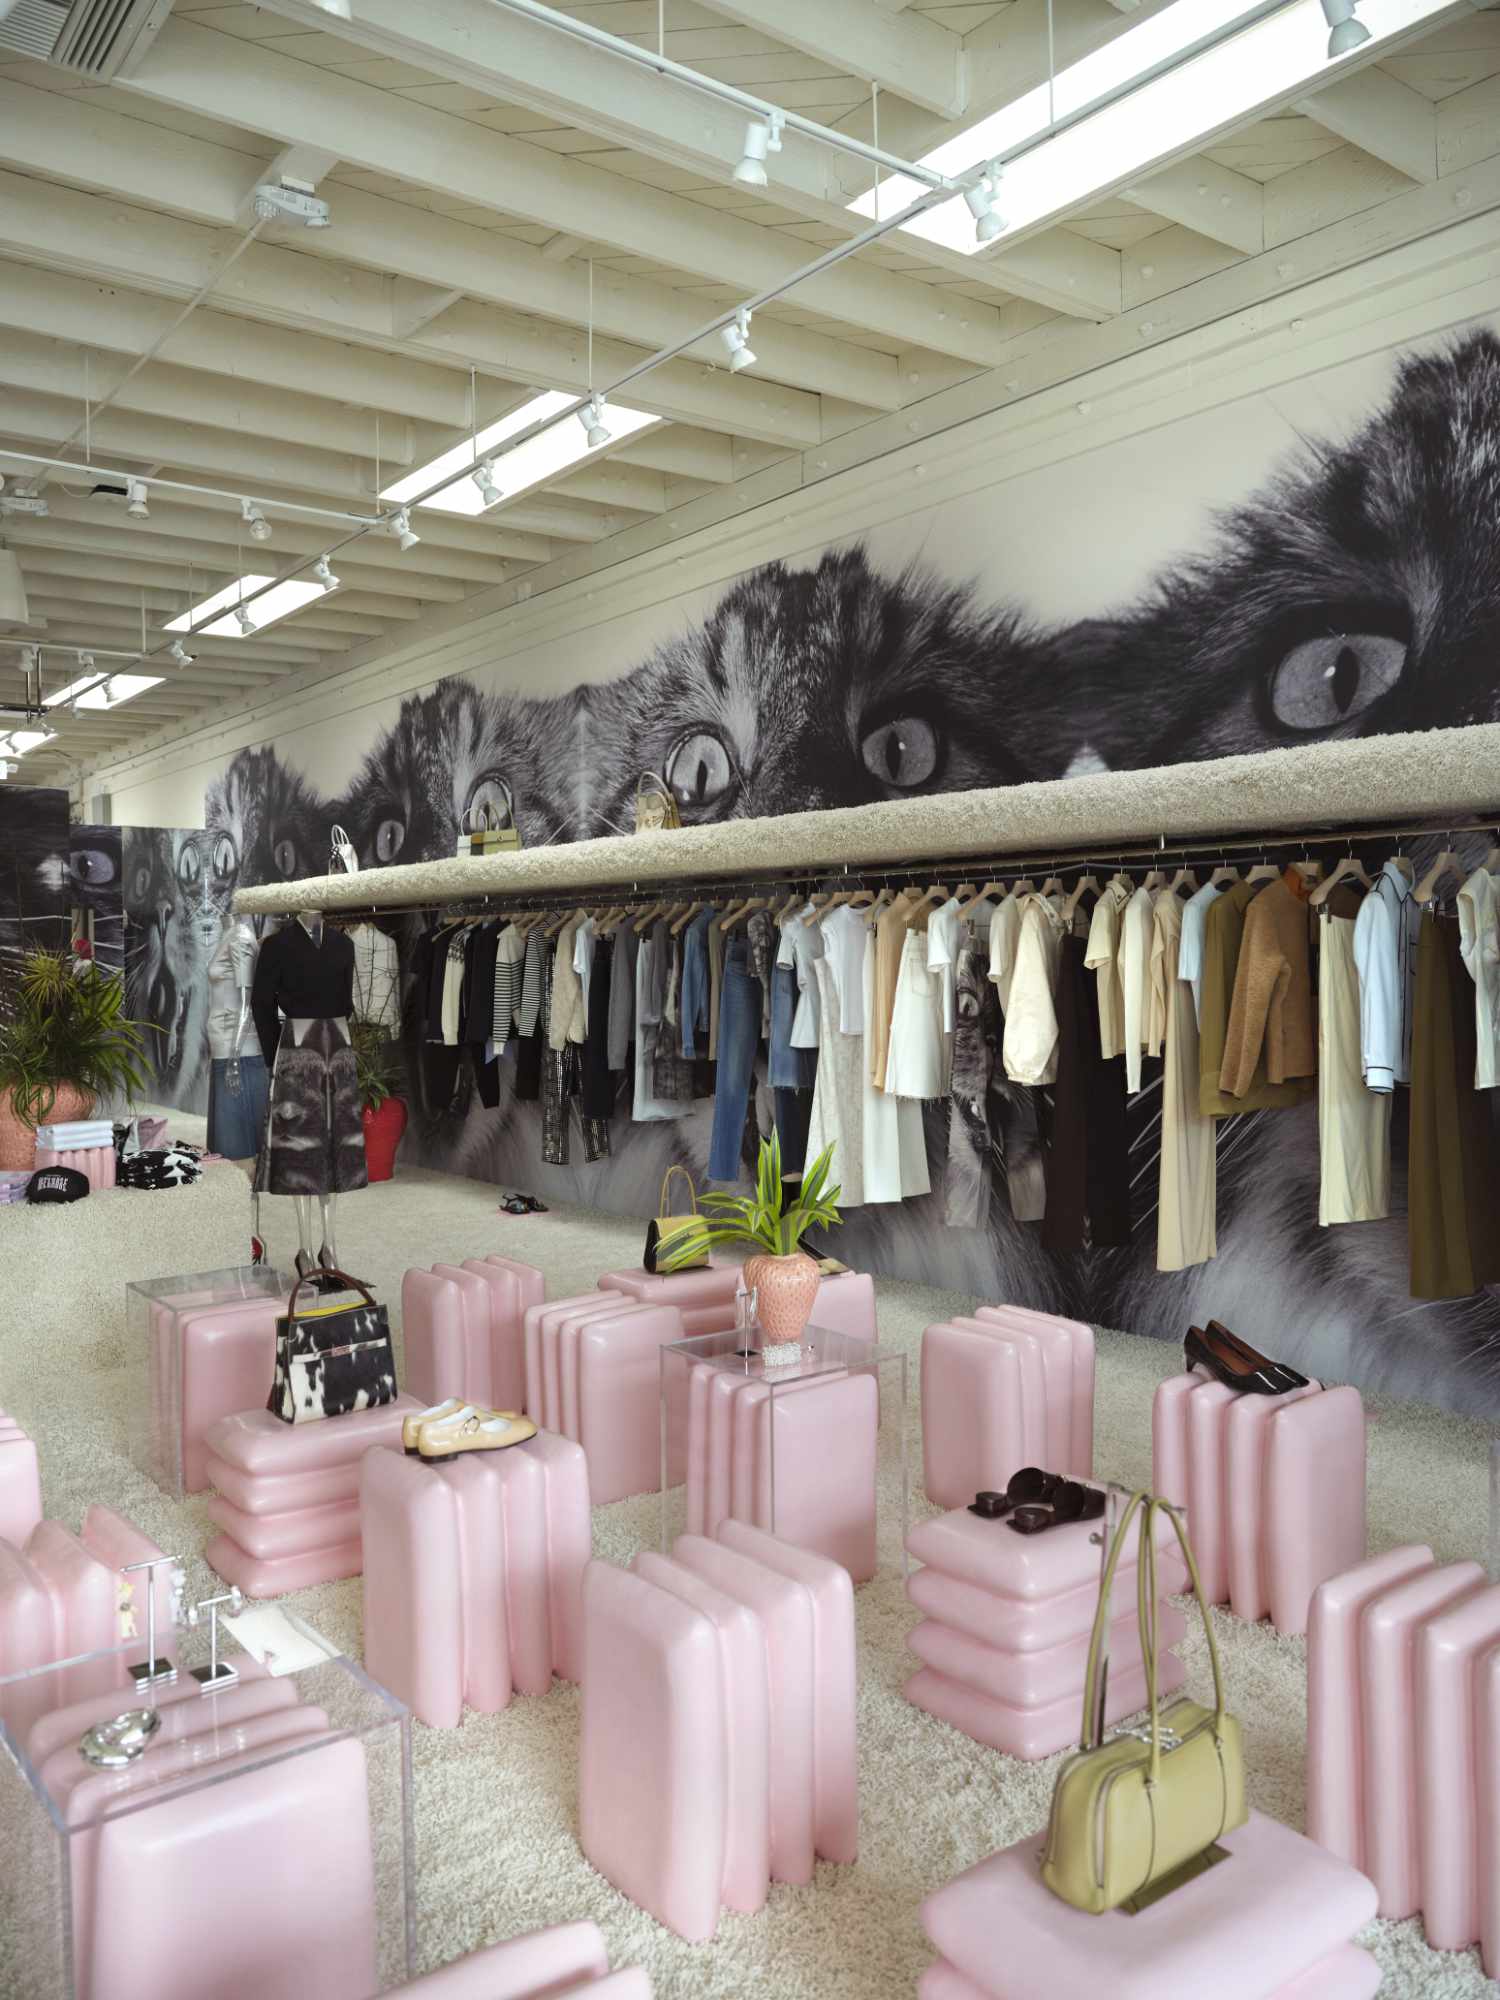 Tory Burch's cat-themed pop-up store in Los Angeles